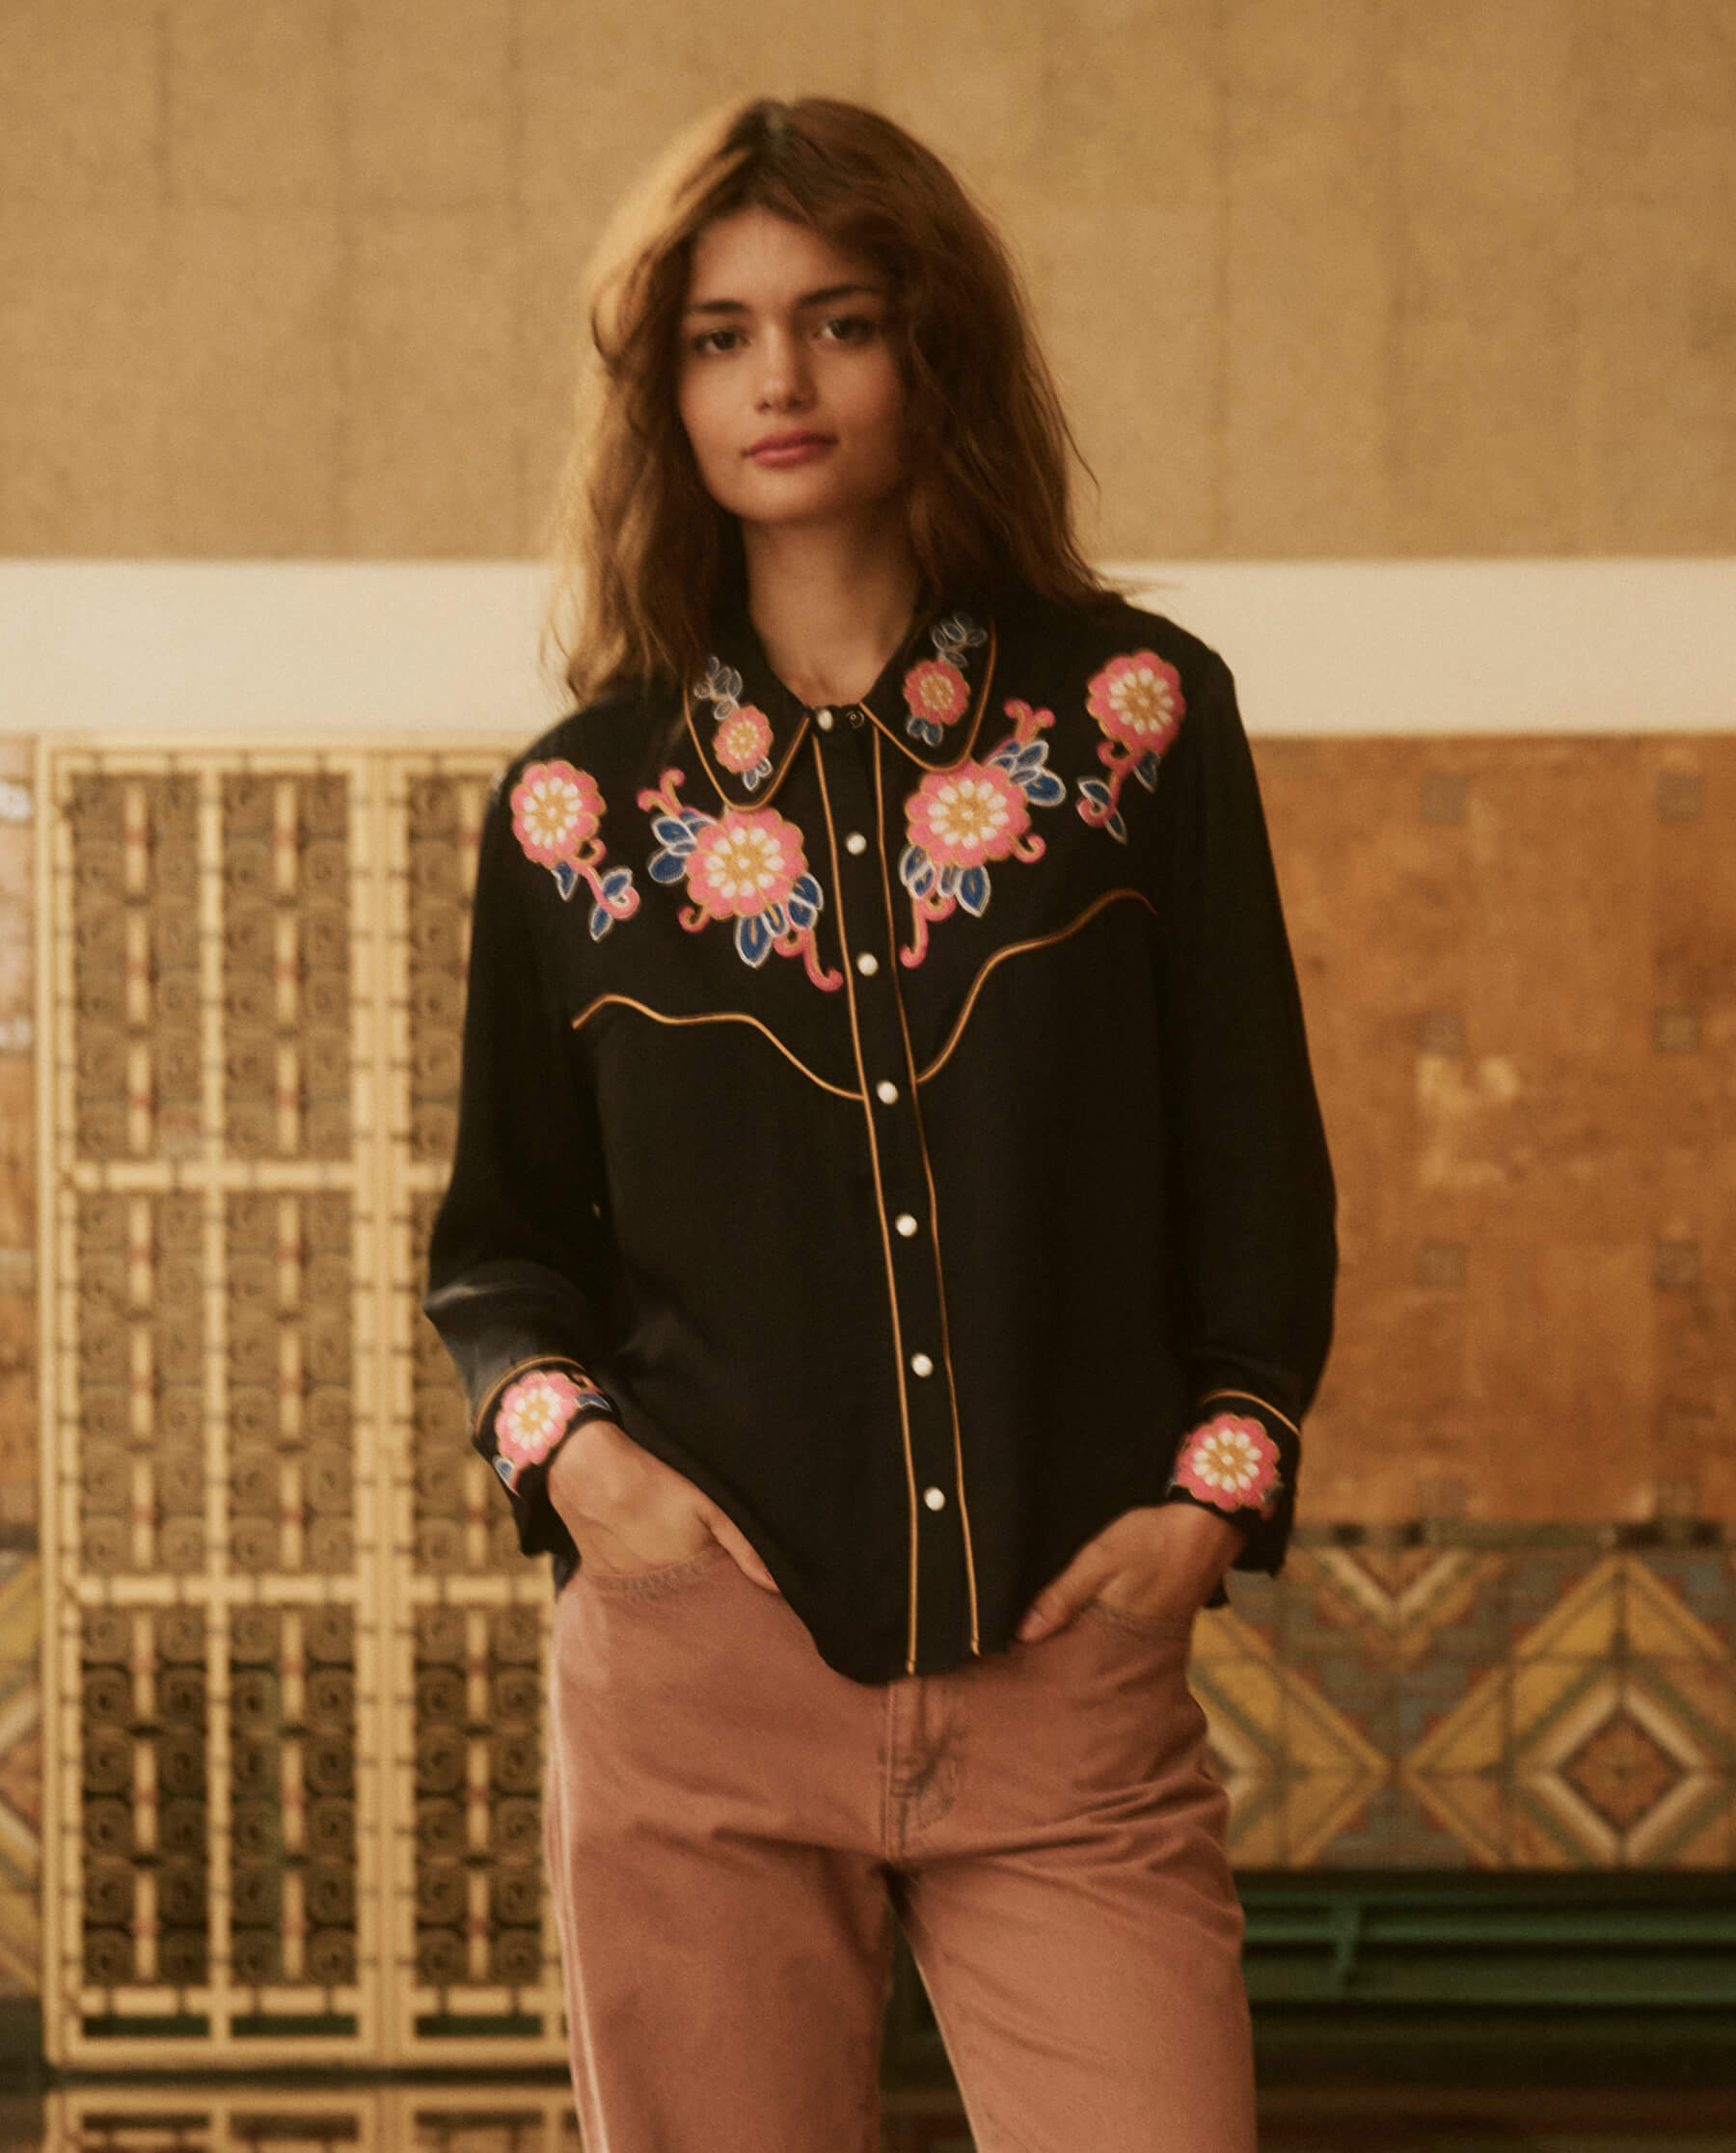 The Gaucho Top. -- Navy Country Floral Embroidery